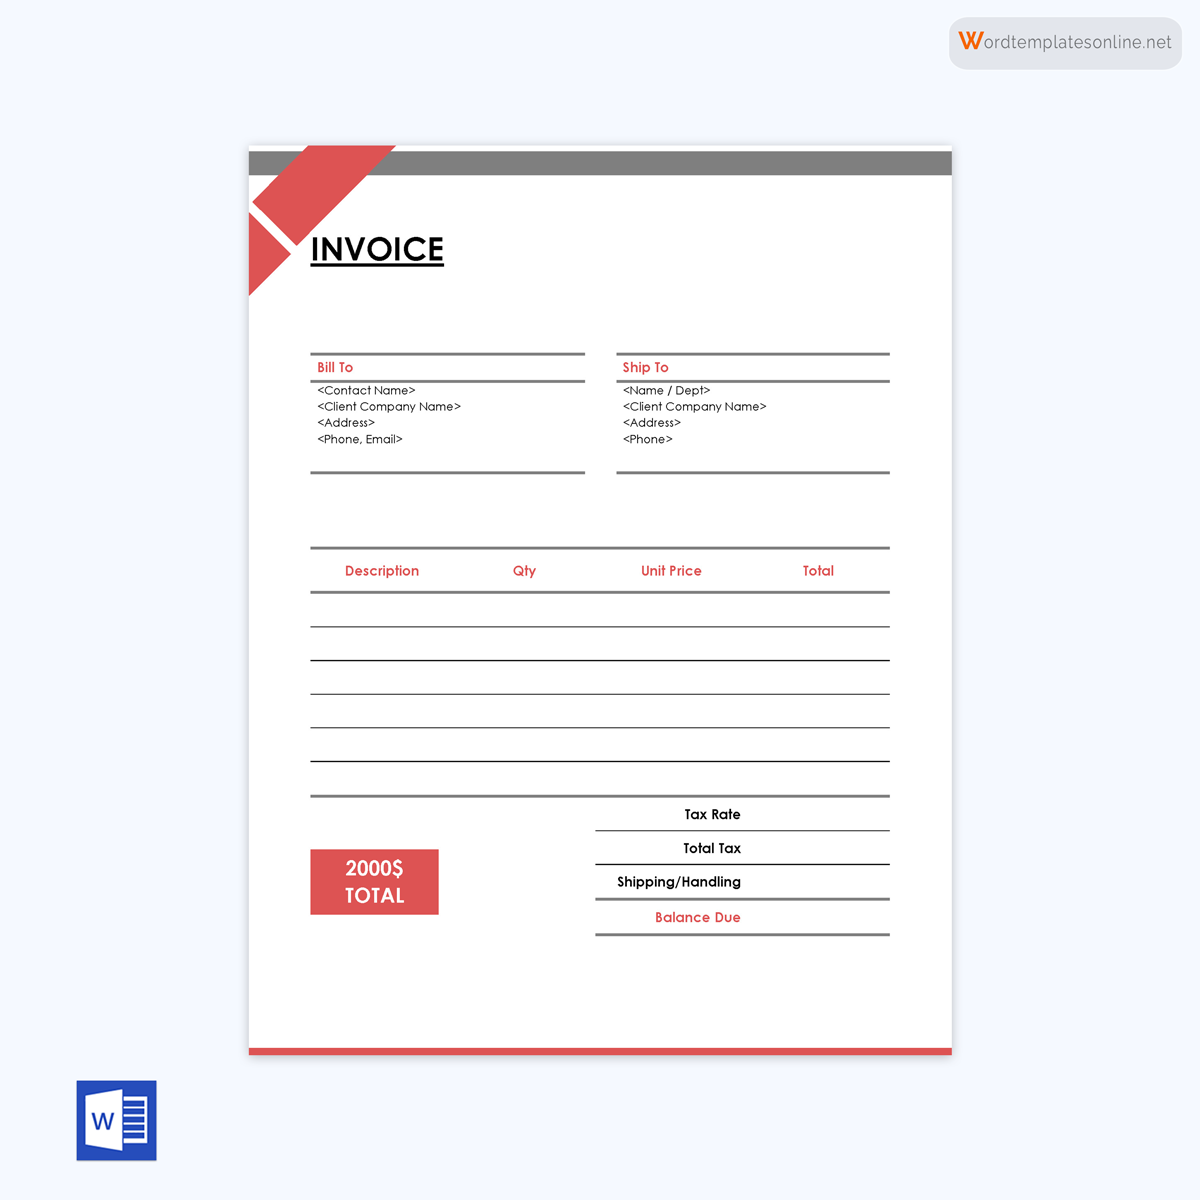 Editable invoice form sample with printable layout